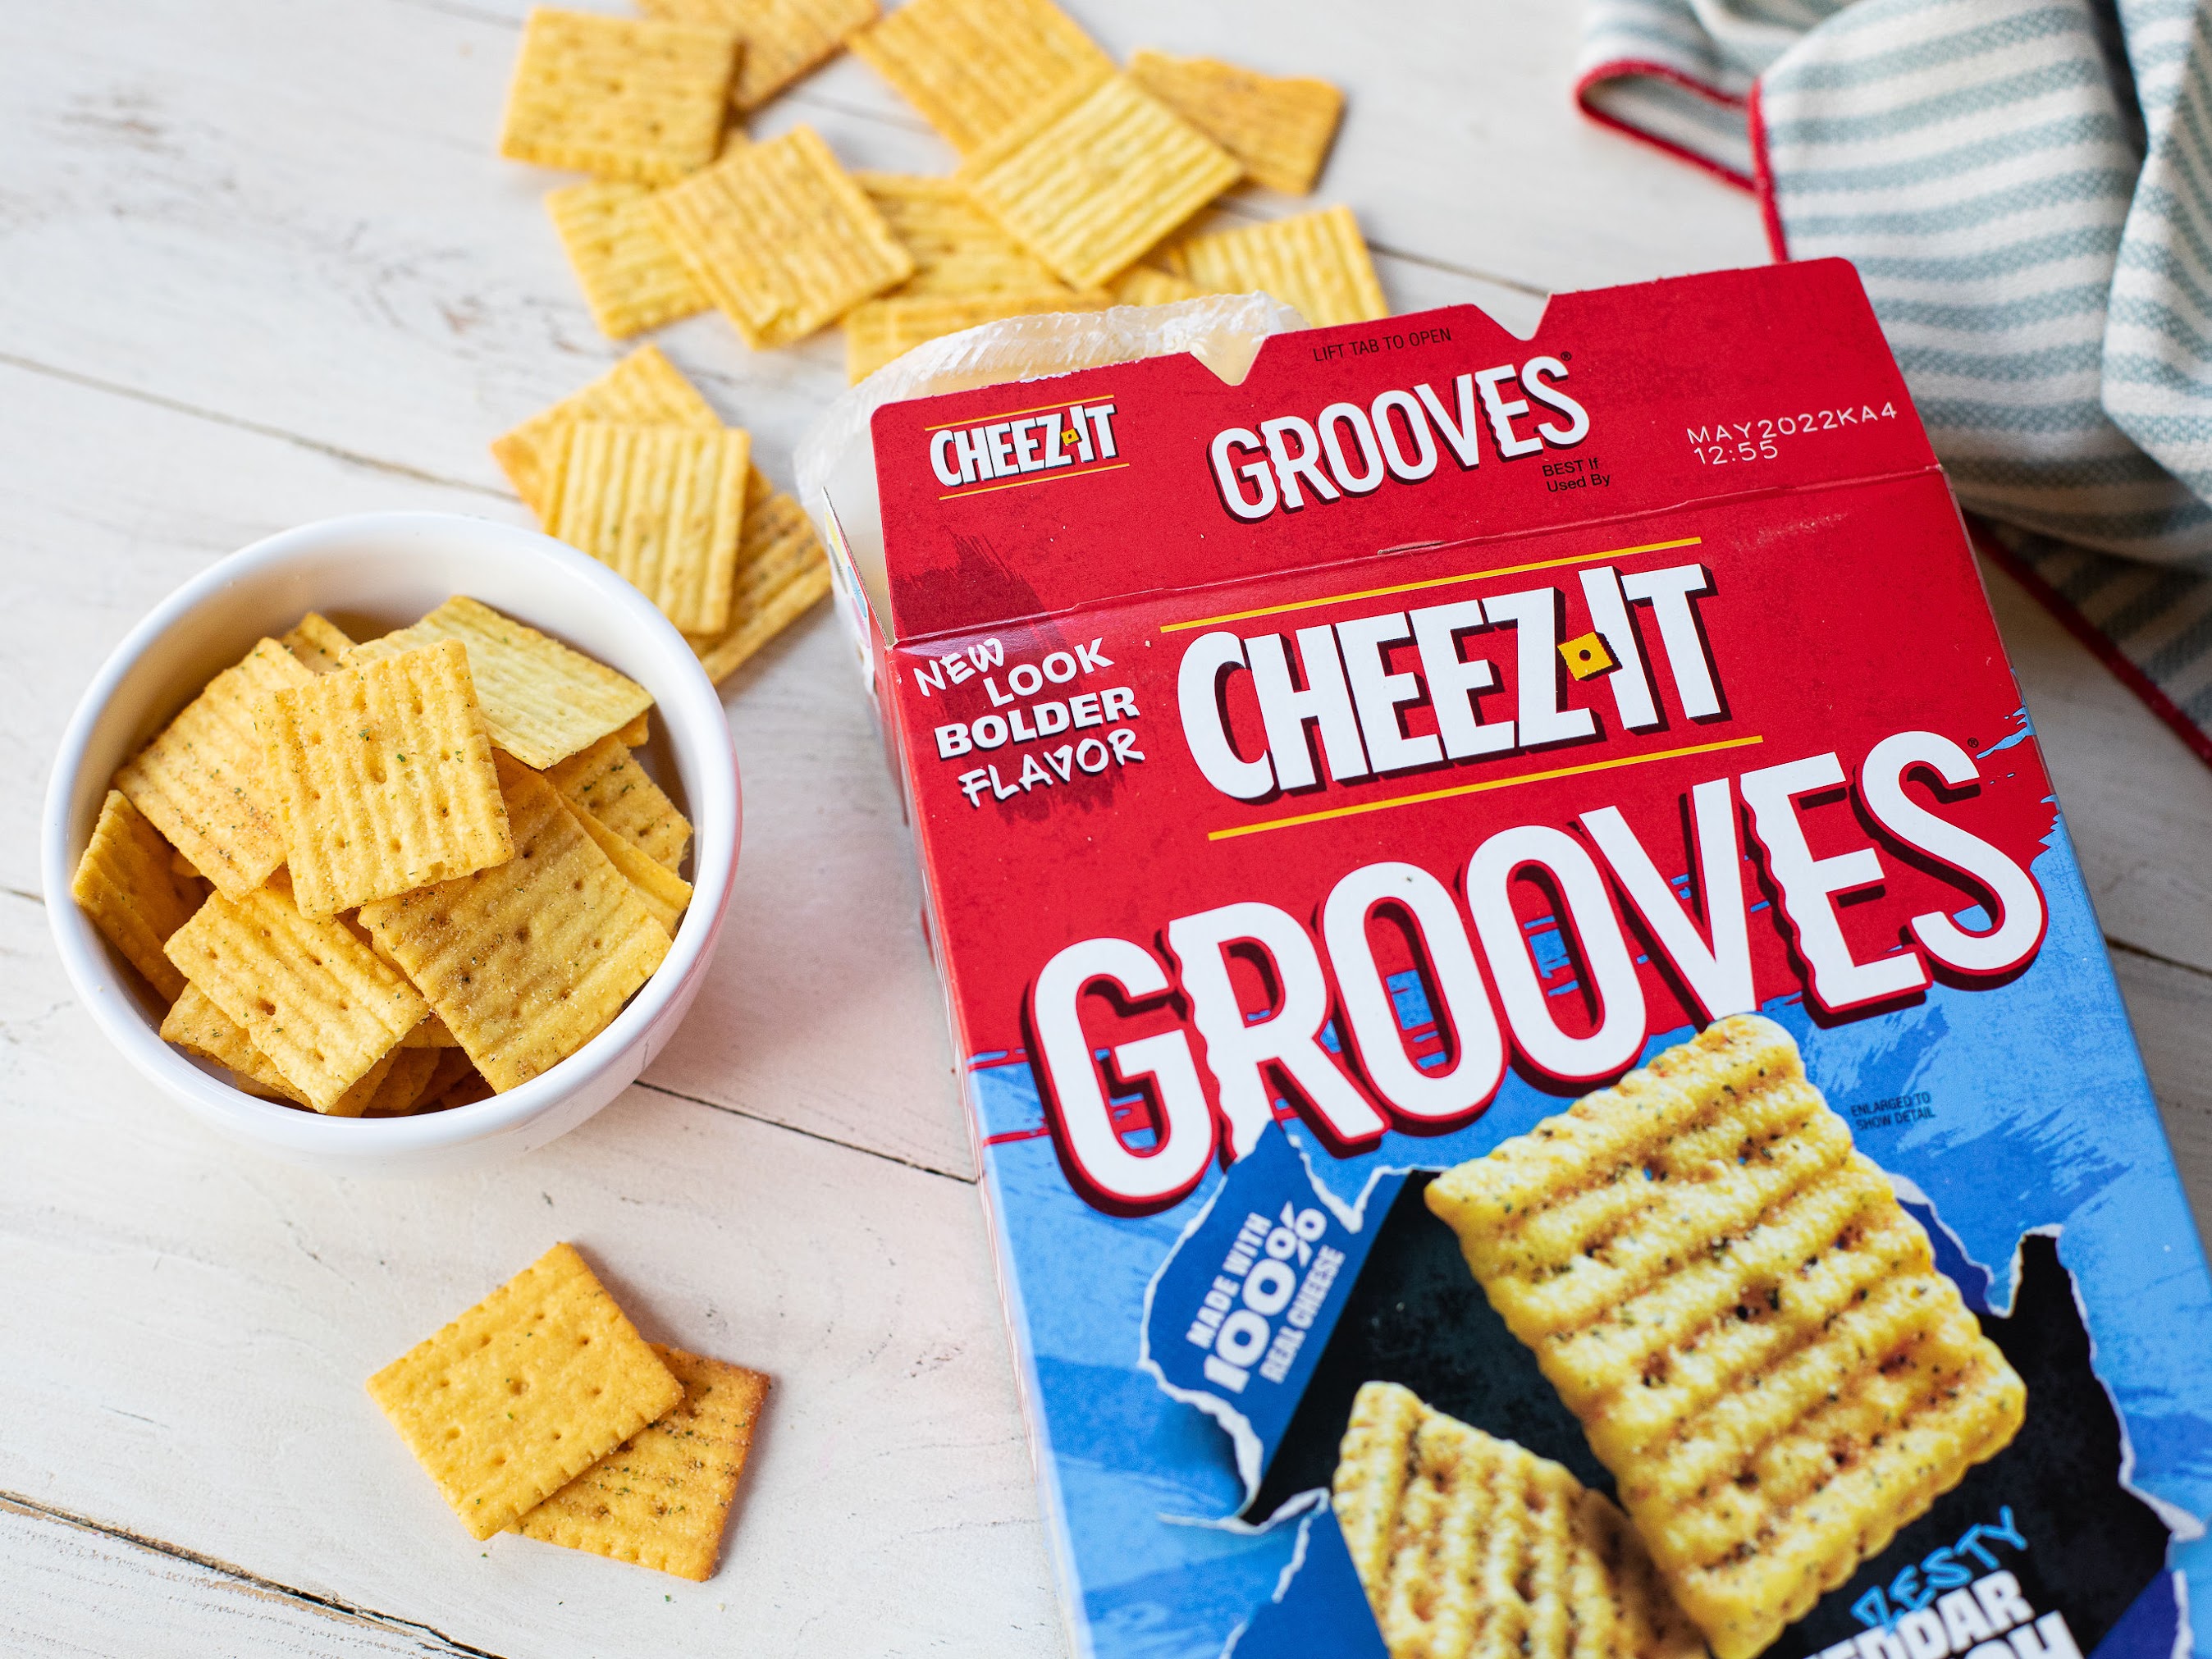 Cheez-It Grooves As Low As 45¢ Per Box At Publix